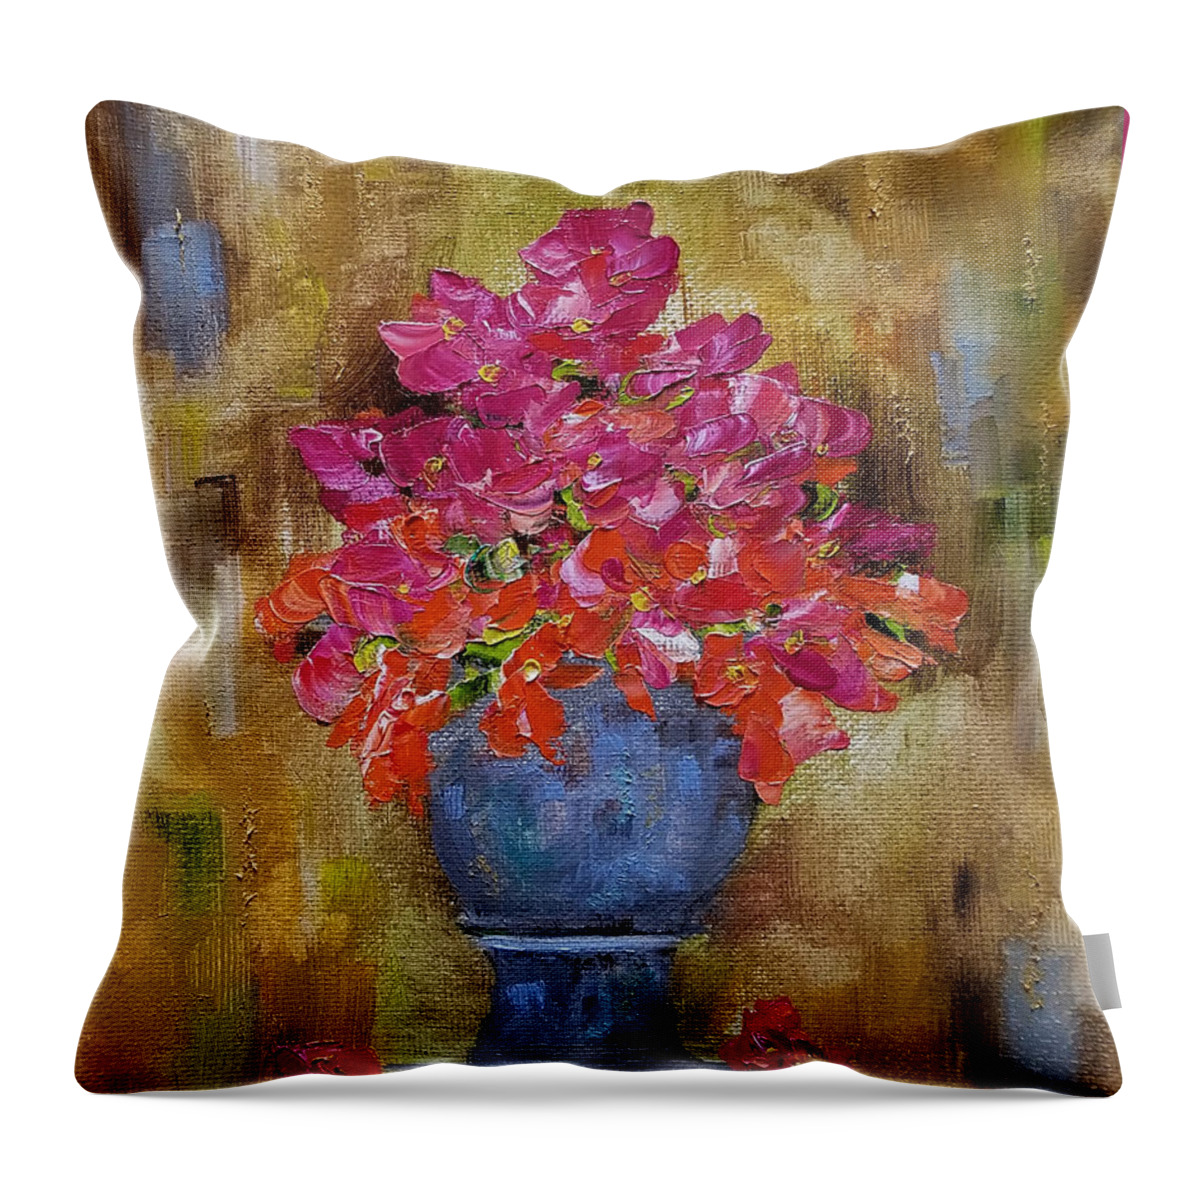 Begonia Throw Pillow featuring the painting Begonia Justice by Judith Rhue